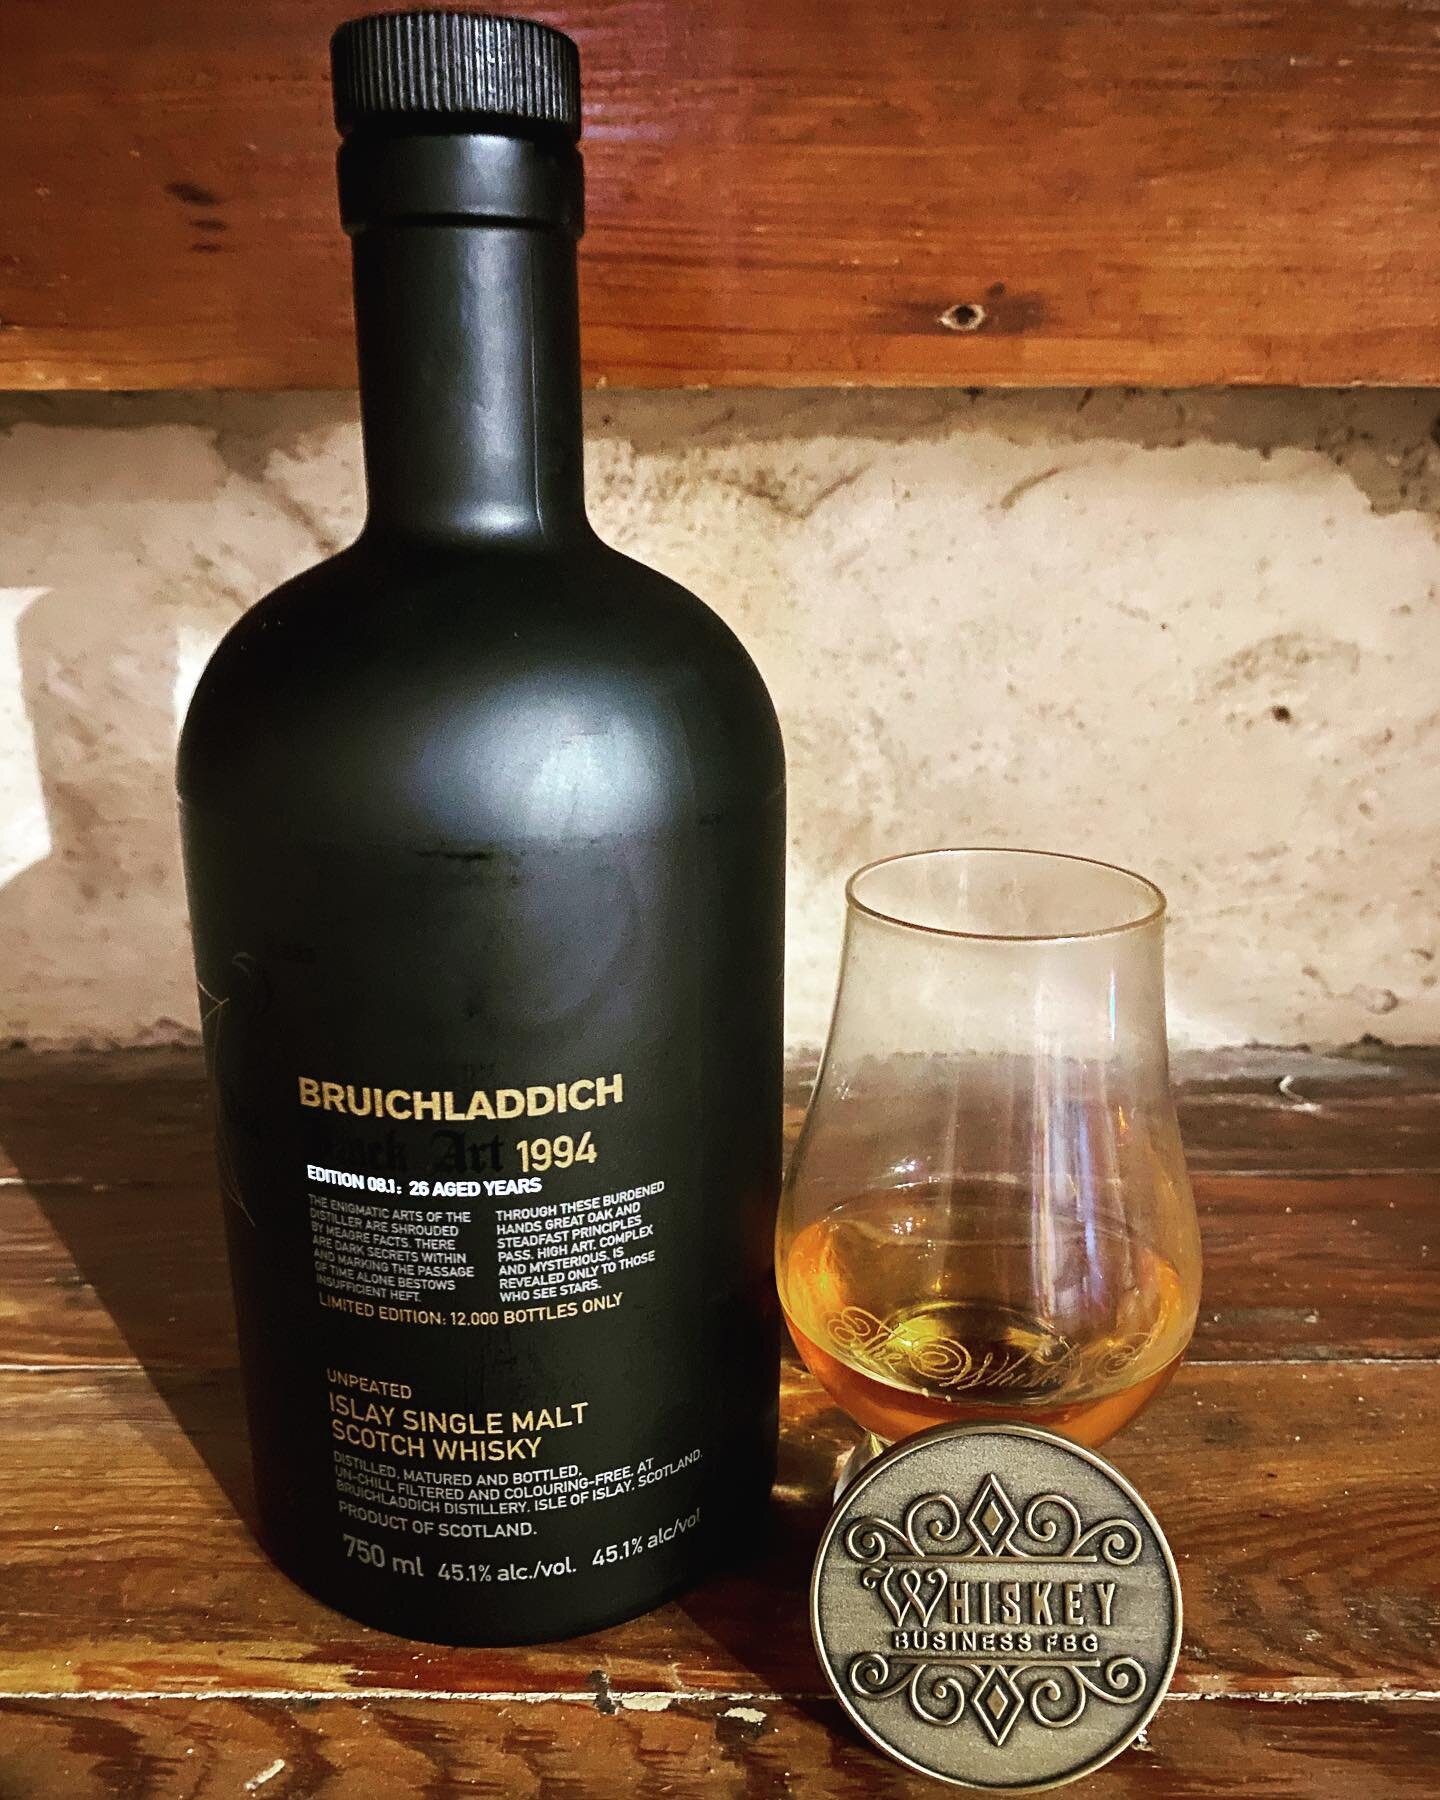 For a very special Sunday Deep Dive, since it&rsquo;s my 42nd year on this earth Tuesday, we are doing a special dive into the best whisky I have found on this earth. Bruichladdich Black Art 8.1. 
Thank you so much to my tasting group ( the Whiskey D